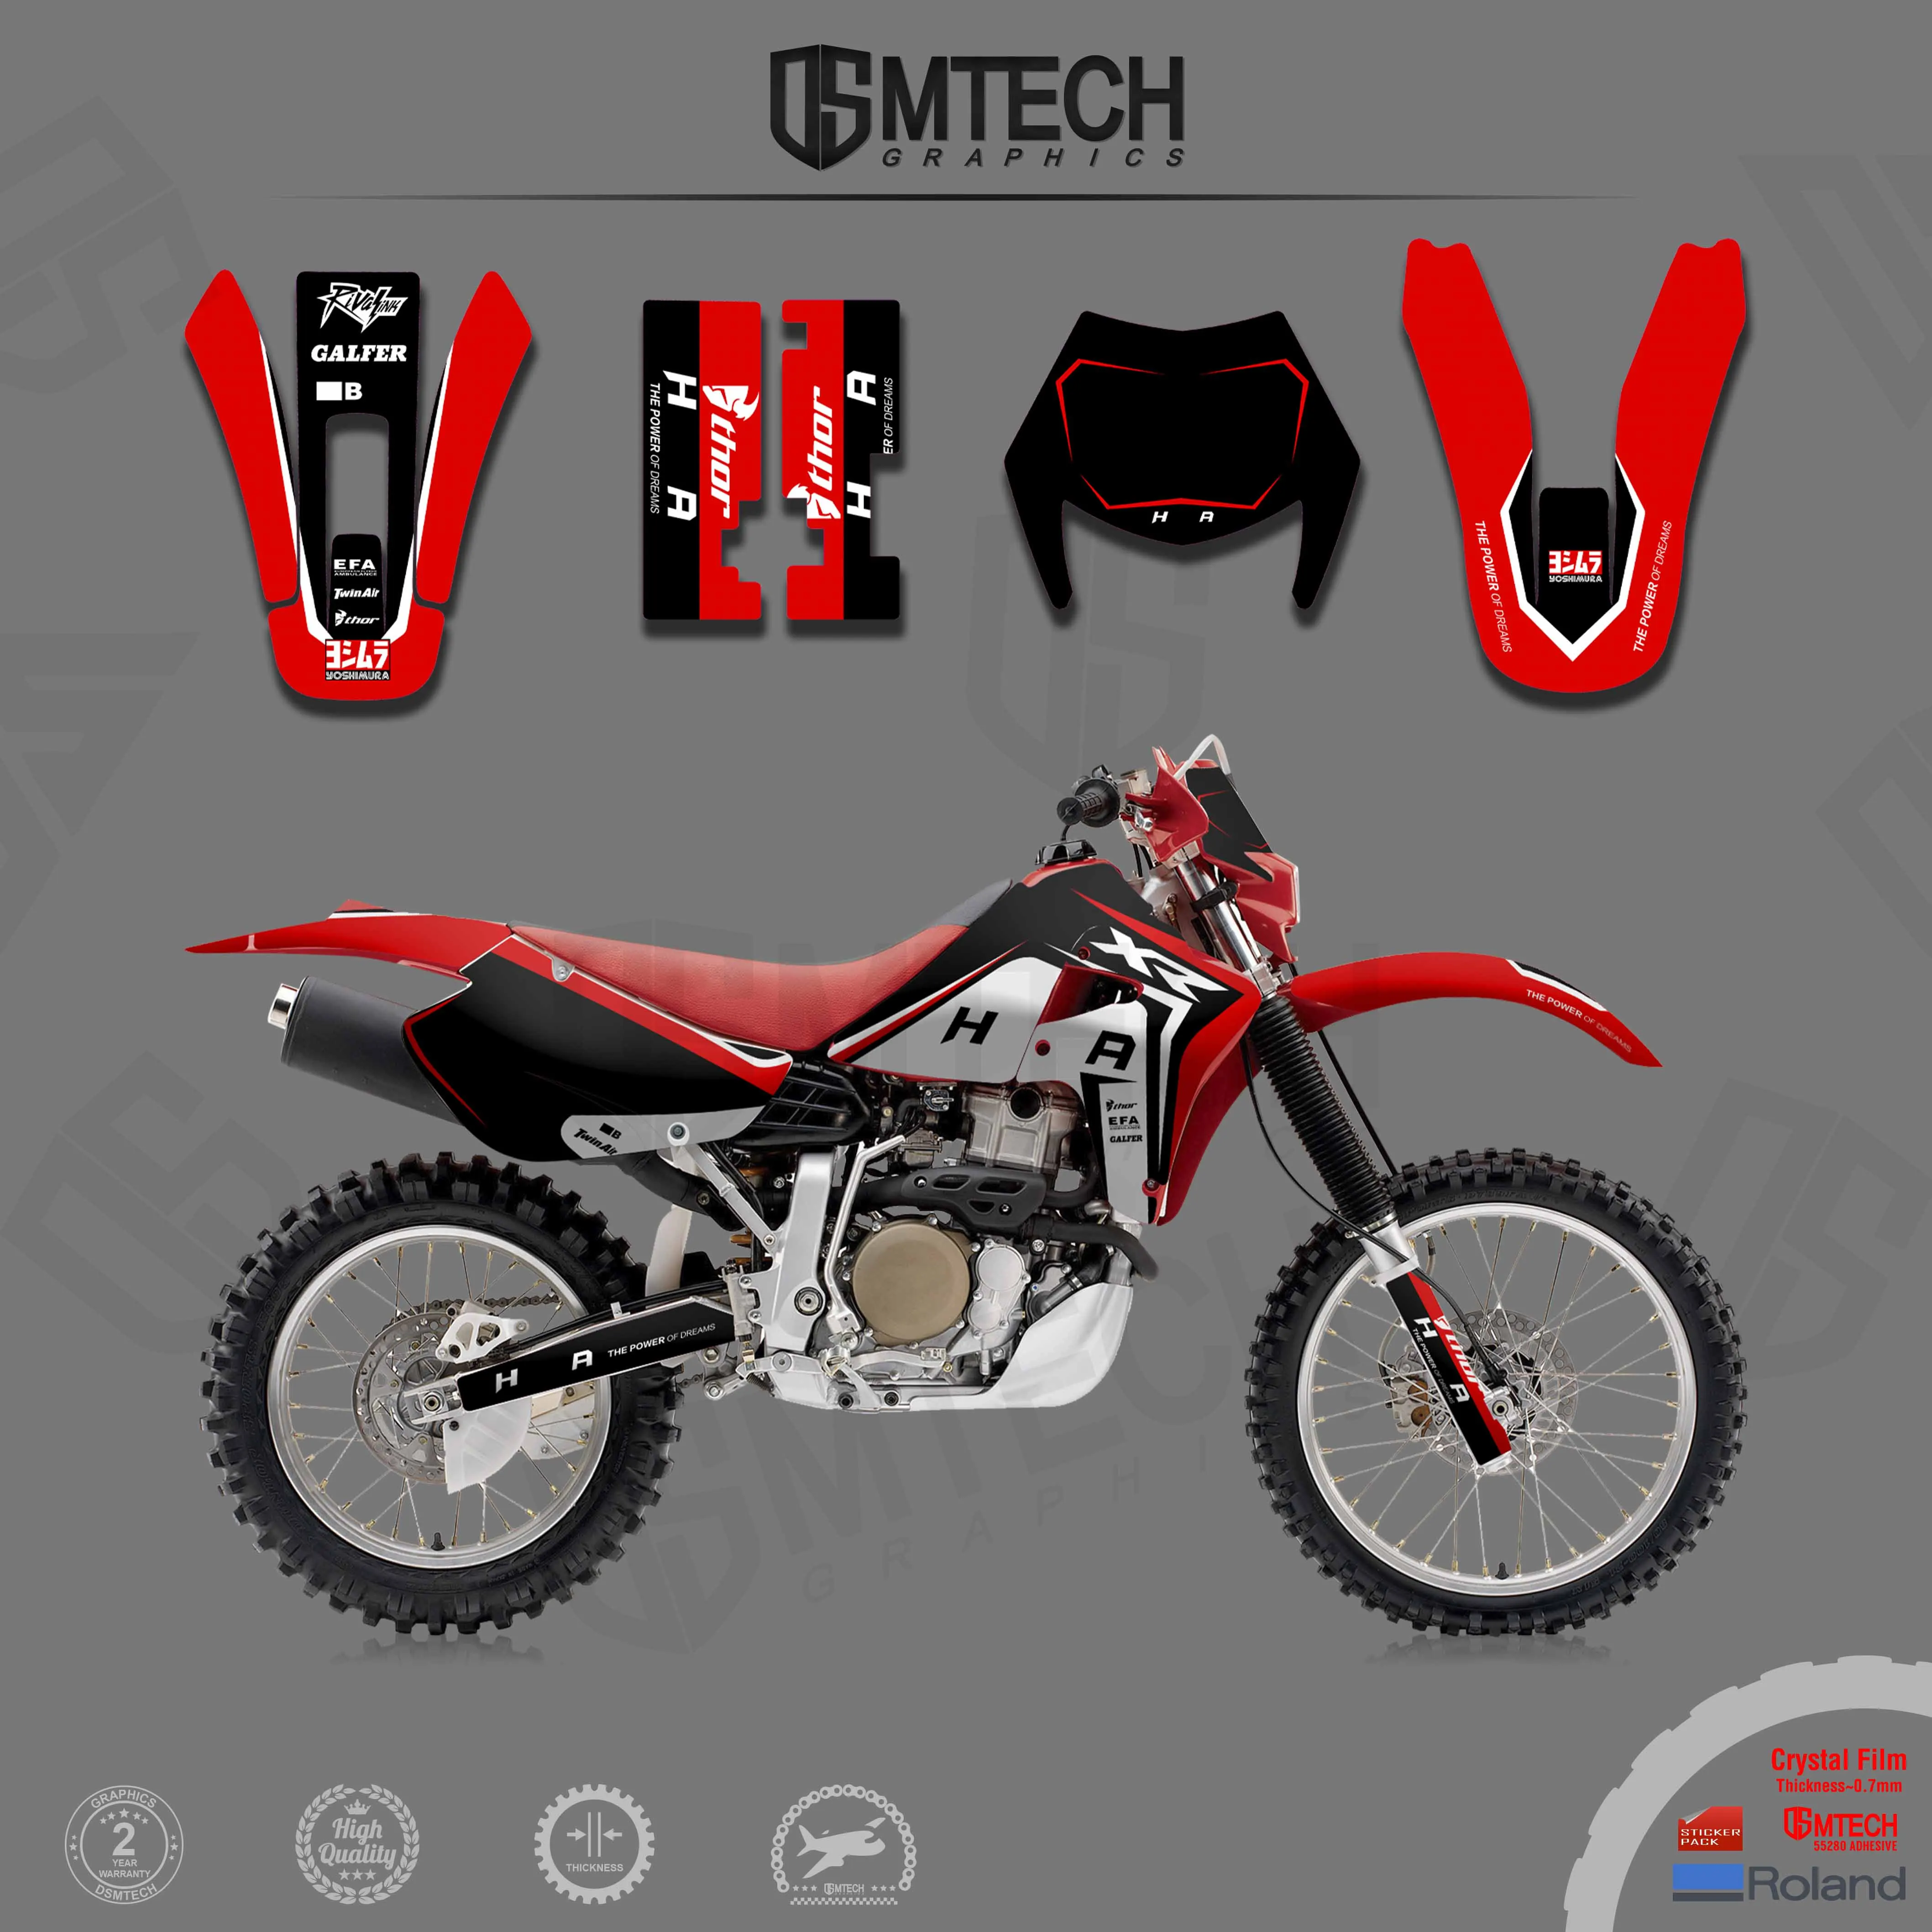 DSMTECH Stickers Motocross Backgrounds Graphics Decals  Kits  For HONDA 2000 2001 2002 2003 2004 2005 2006 2007-2009 XR650 R 003